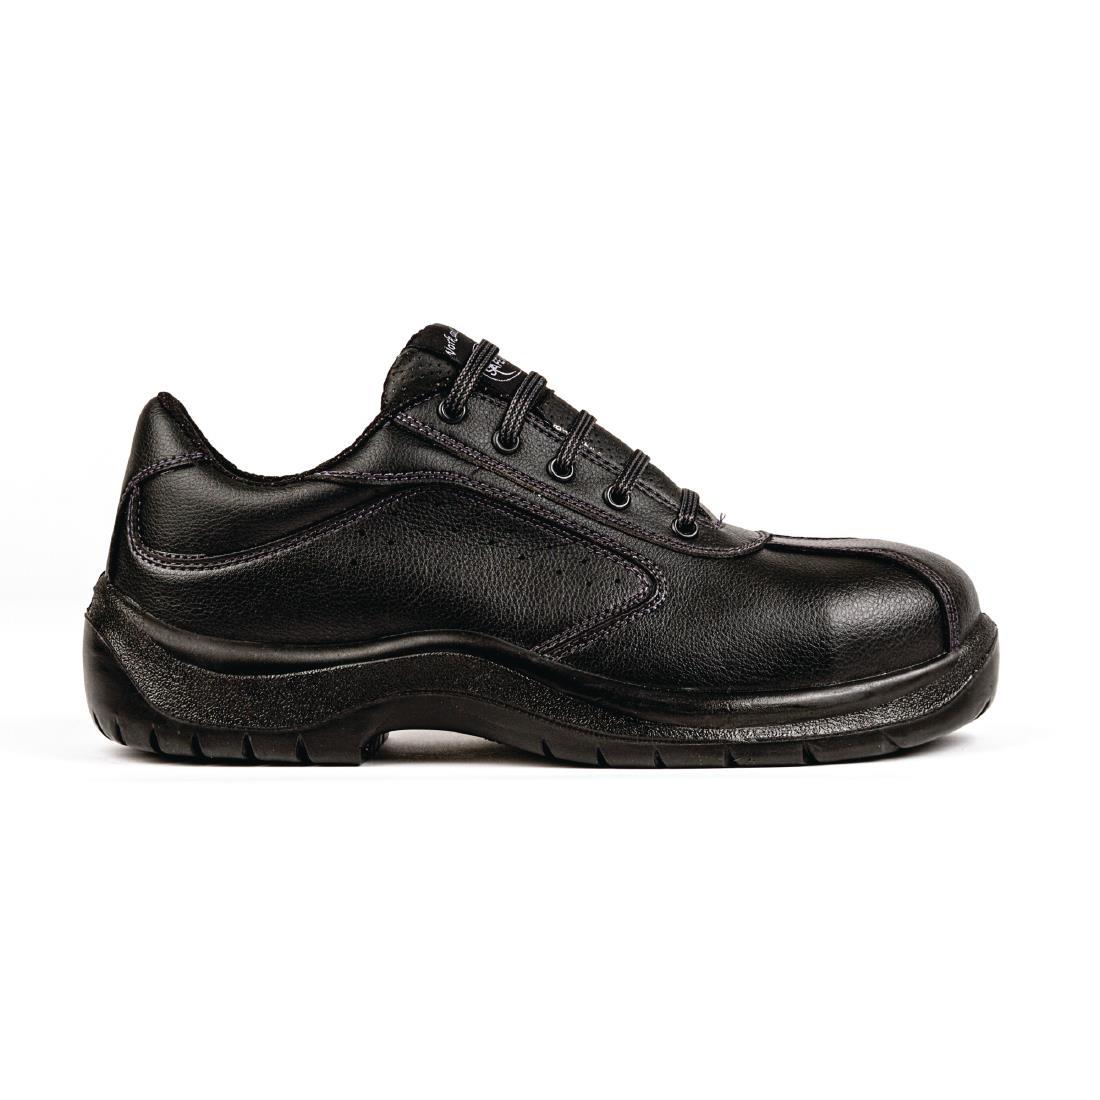 Slipbuster Side Perforated Lace Up Black 43